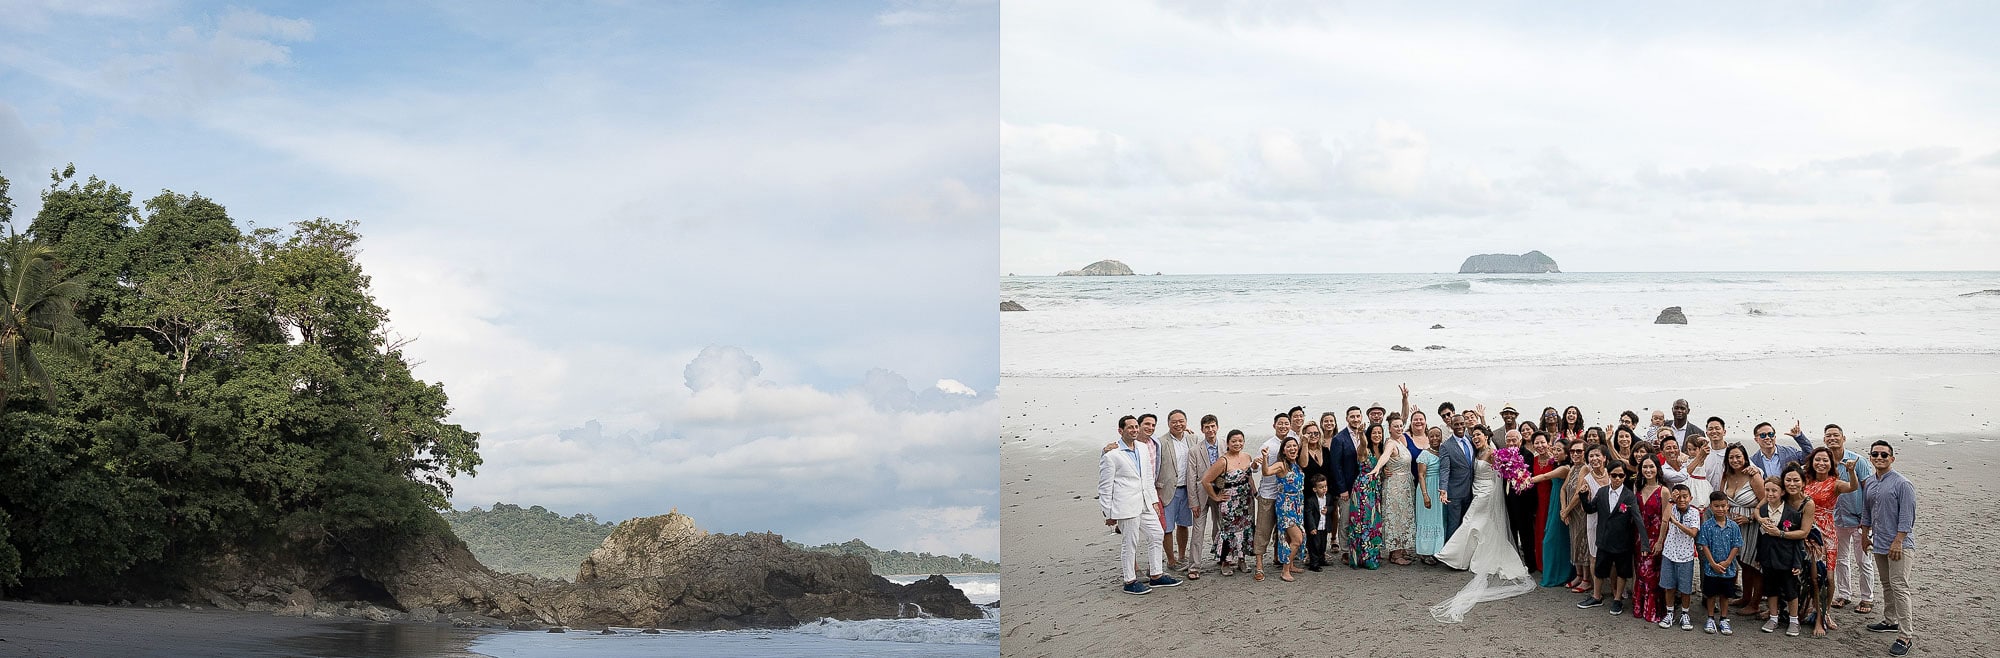 A shot of the whole wedding group in their epic location at Arenas del Mar